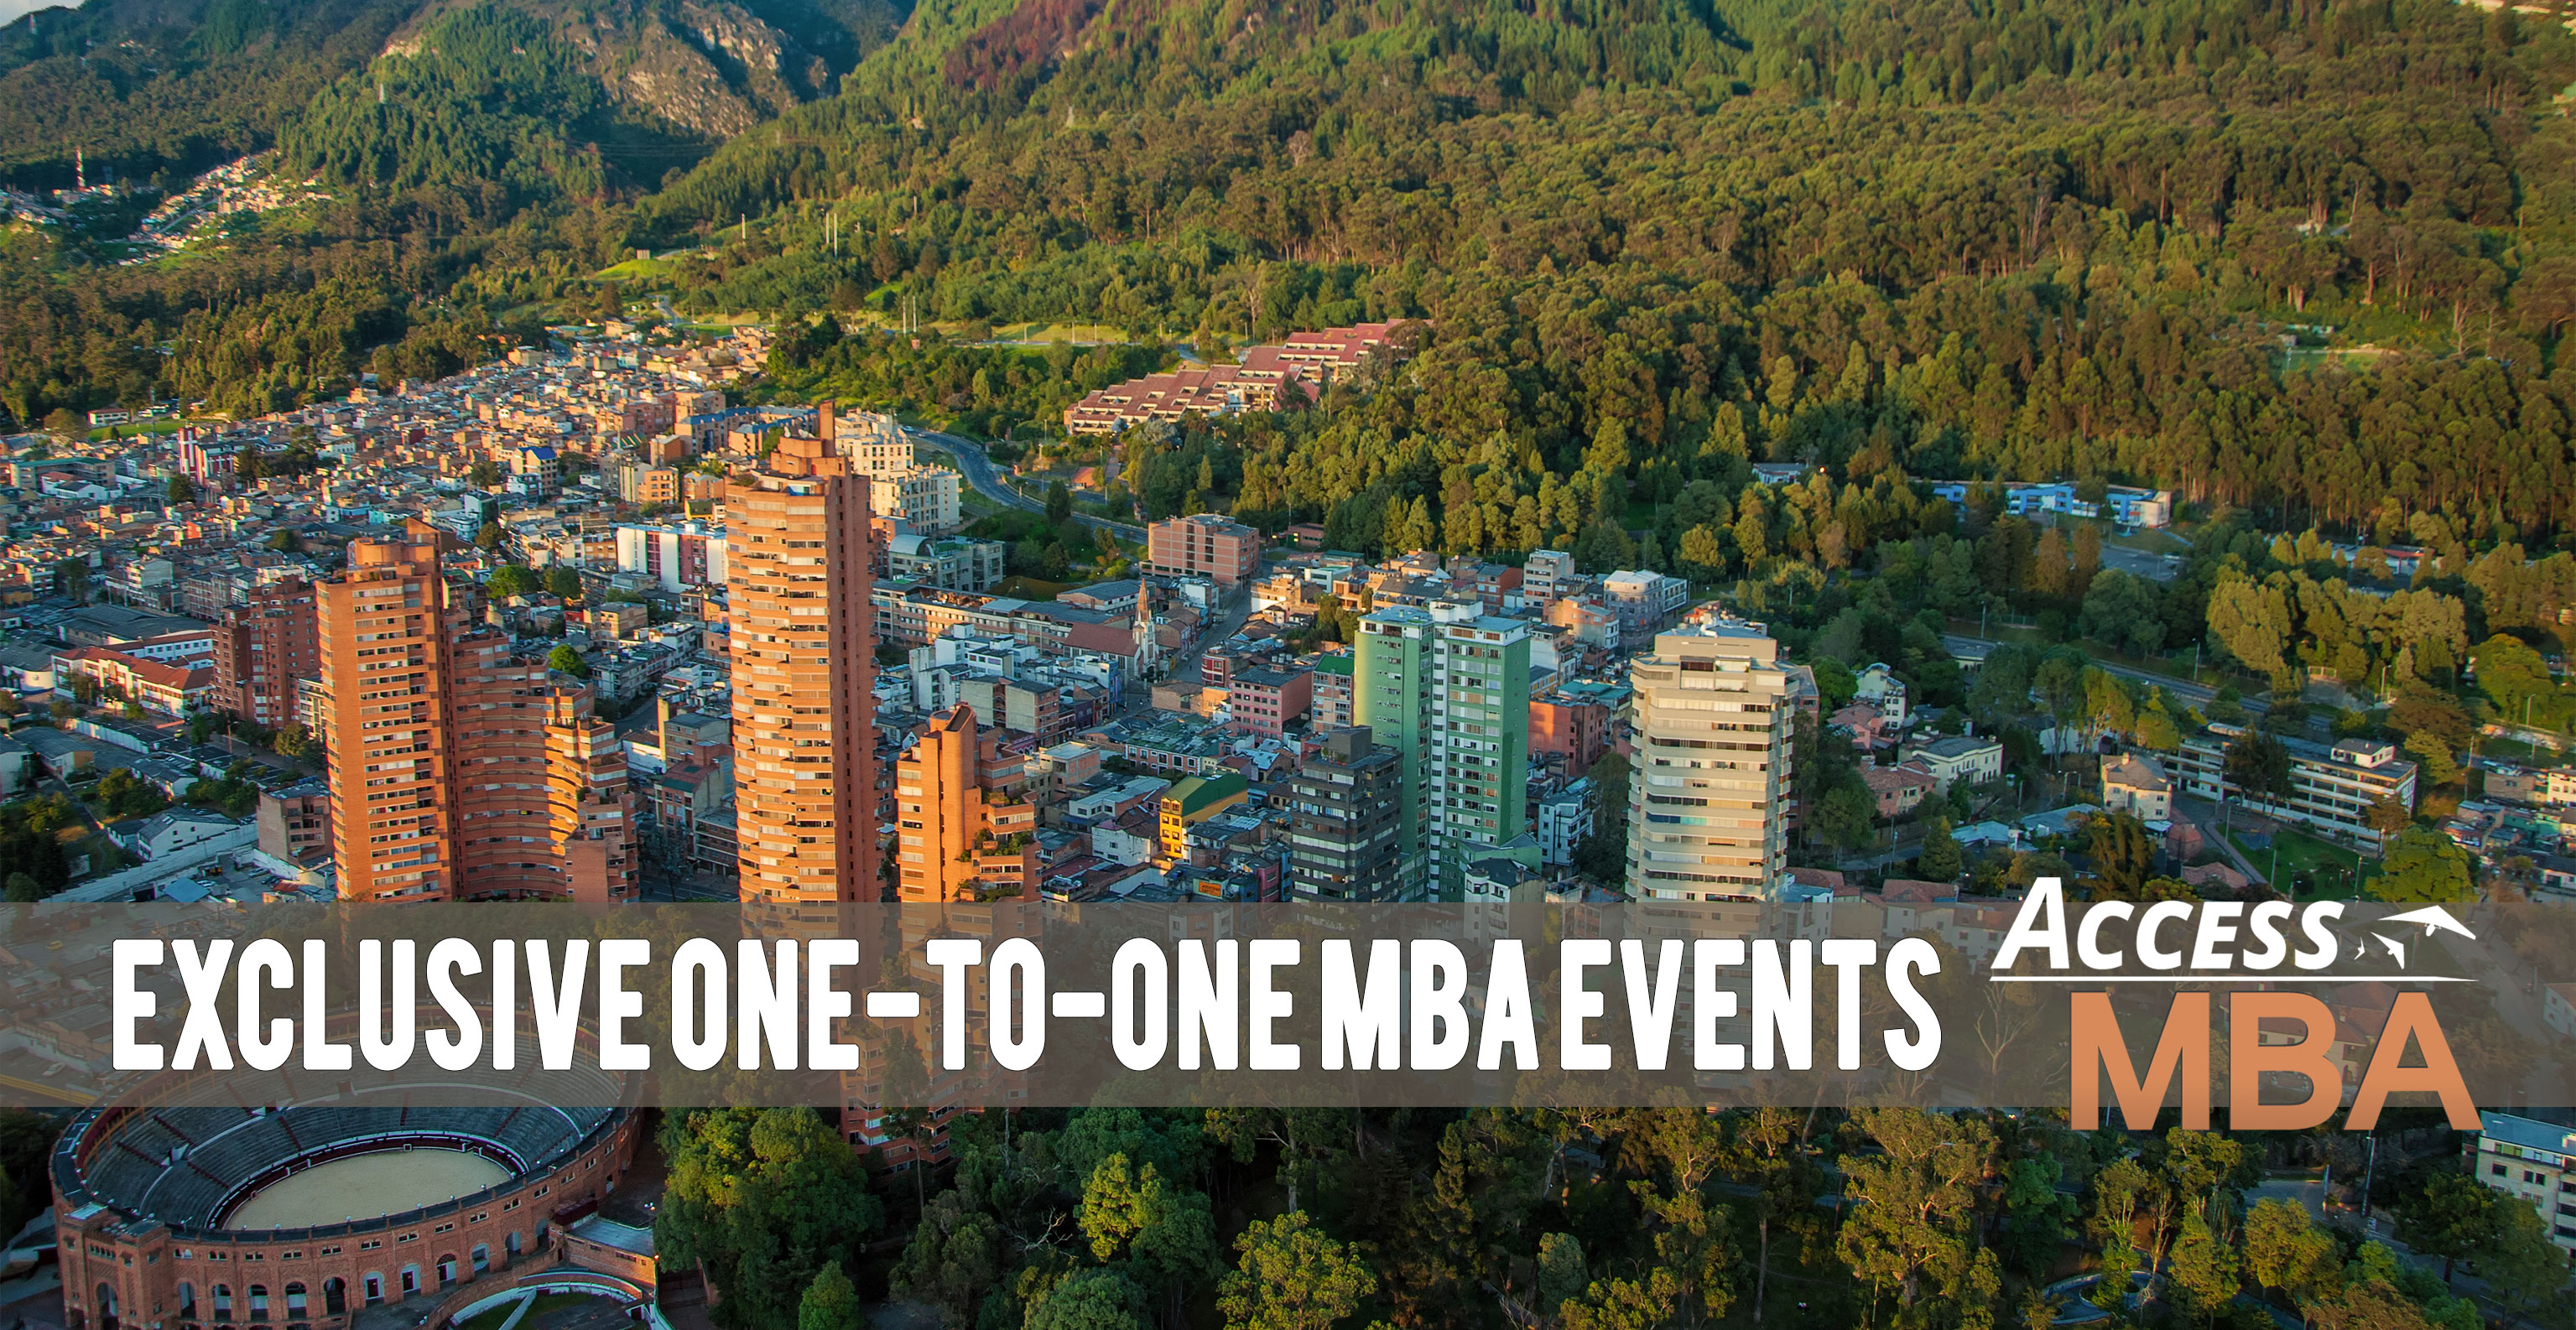 Meet the best MBA schools in Bogota on Tuesday, February 25th!, Bogota, Cundinamarca, Colombia